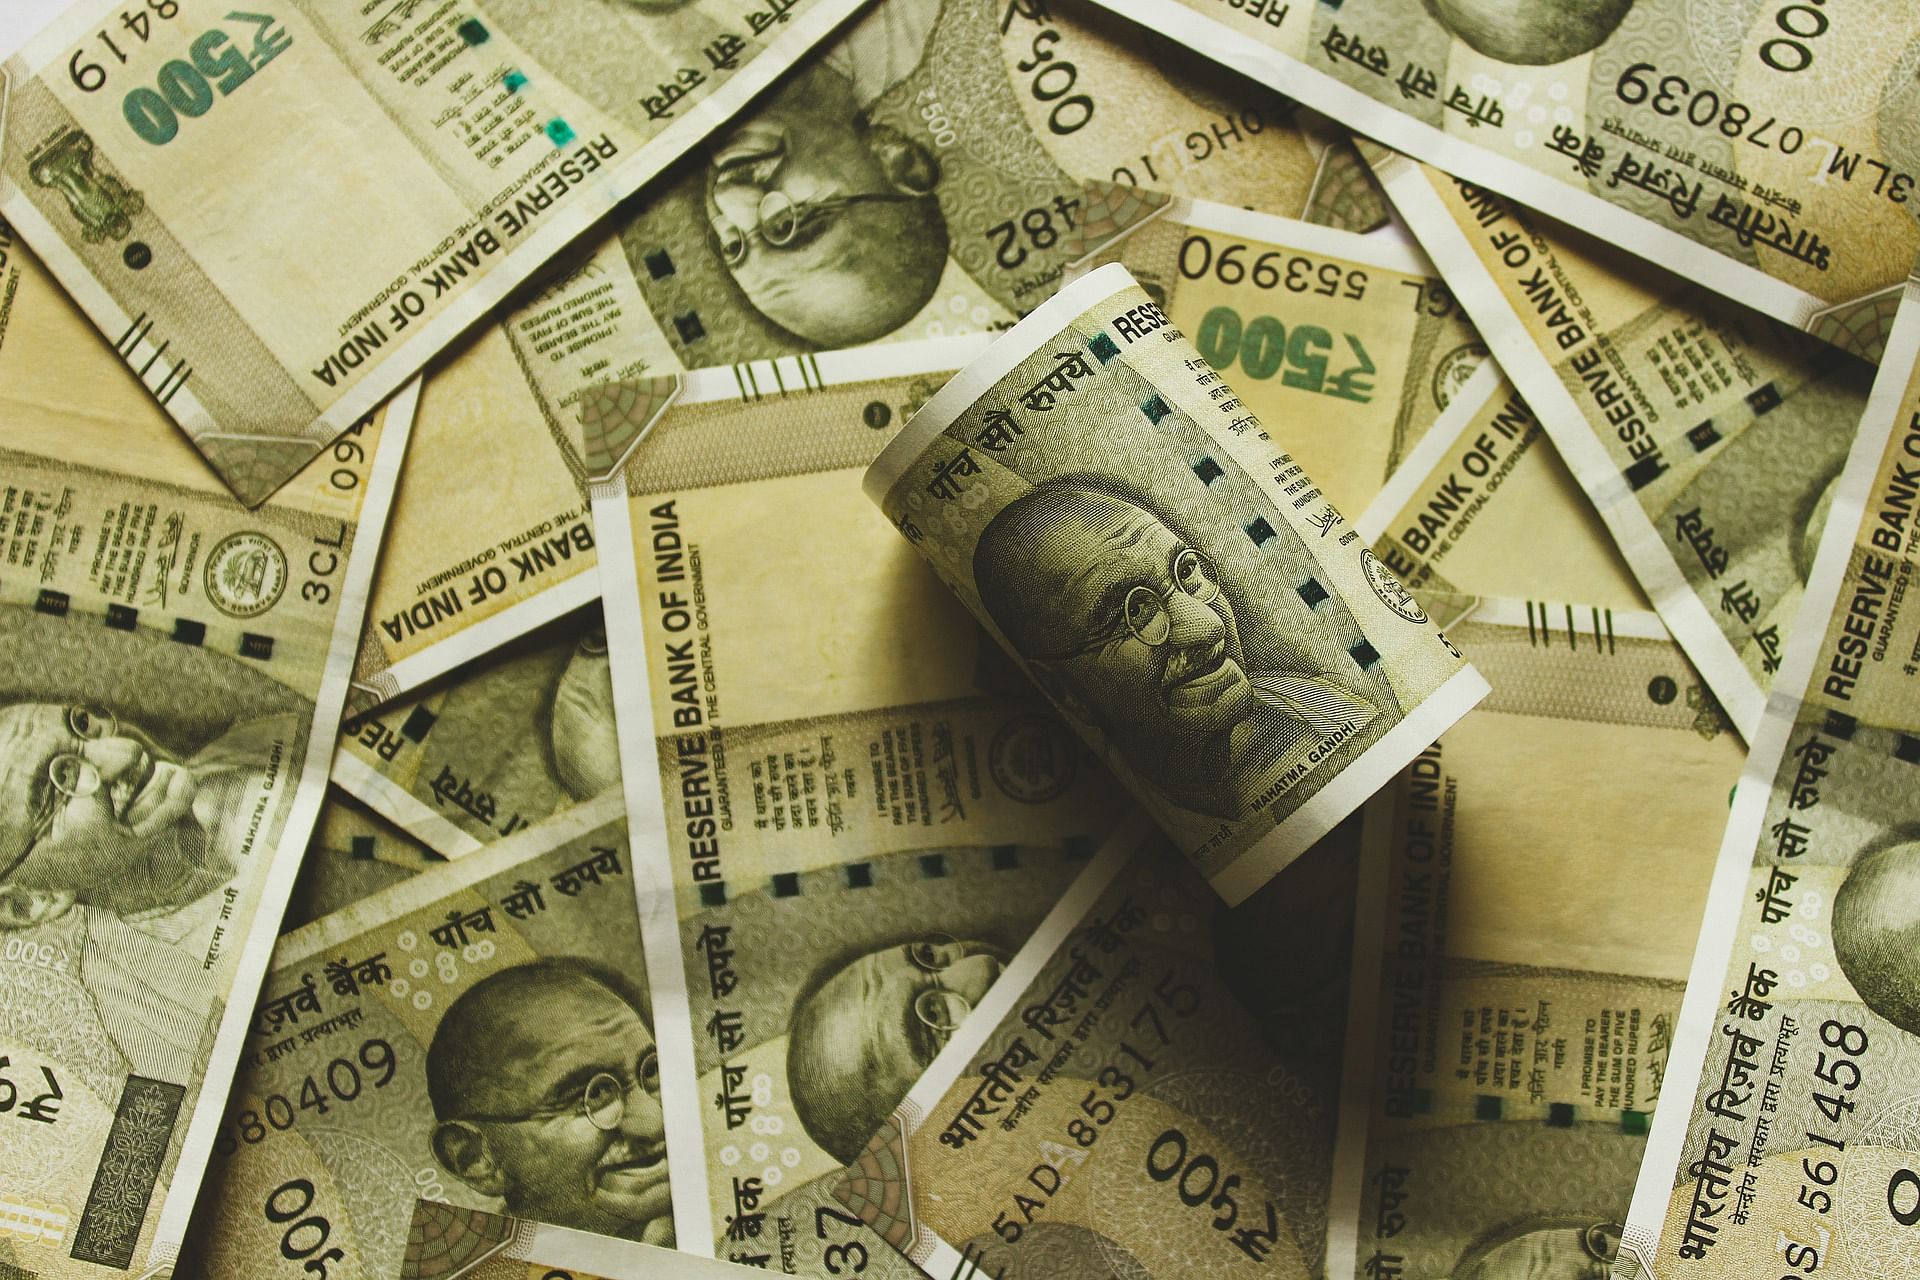 IndiaRF had earlier raised USD 100 million from the International Finance Corporation (IFC) through its distressed asset recovery program. Photo/Pixabay